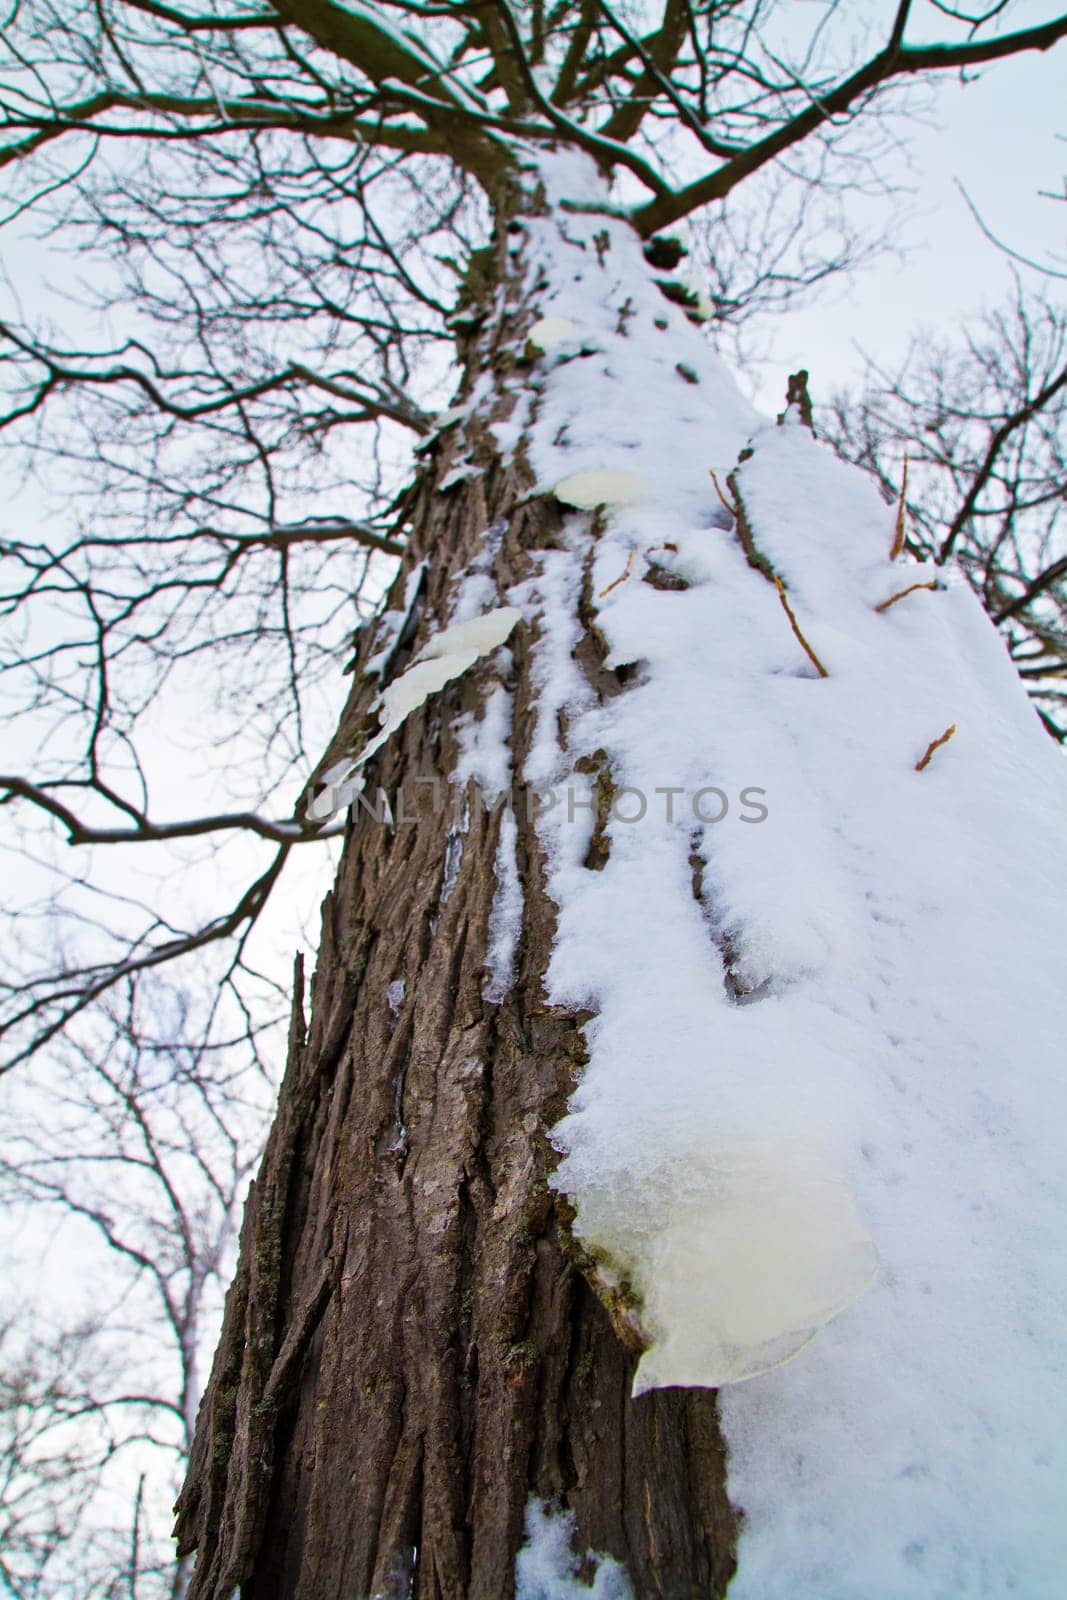 Captivating winter scene of a majestic snow-covered tree trunk in Fort Wayne, Indiana. The rugged bark texture contrasts beautifully with the fresh white snow, creating a serene and resilient natural landscape.